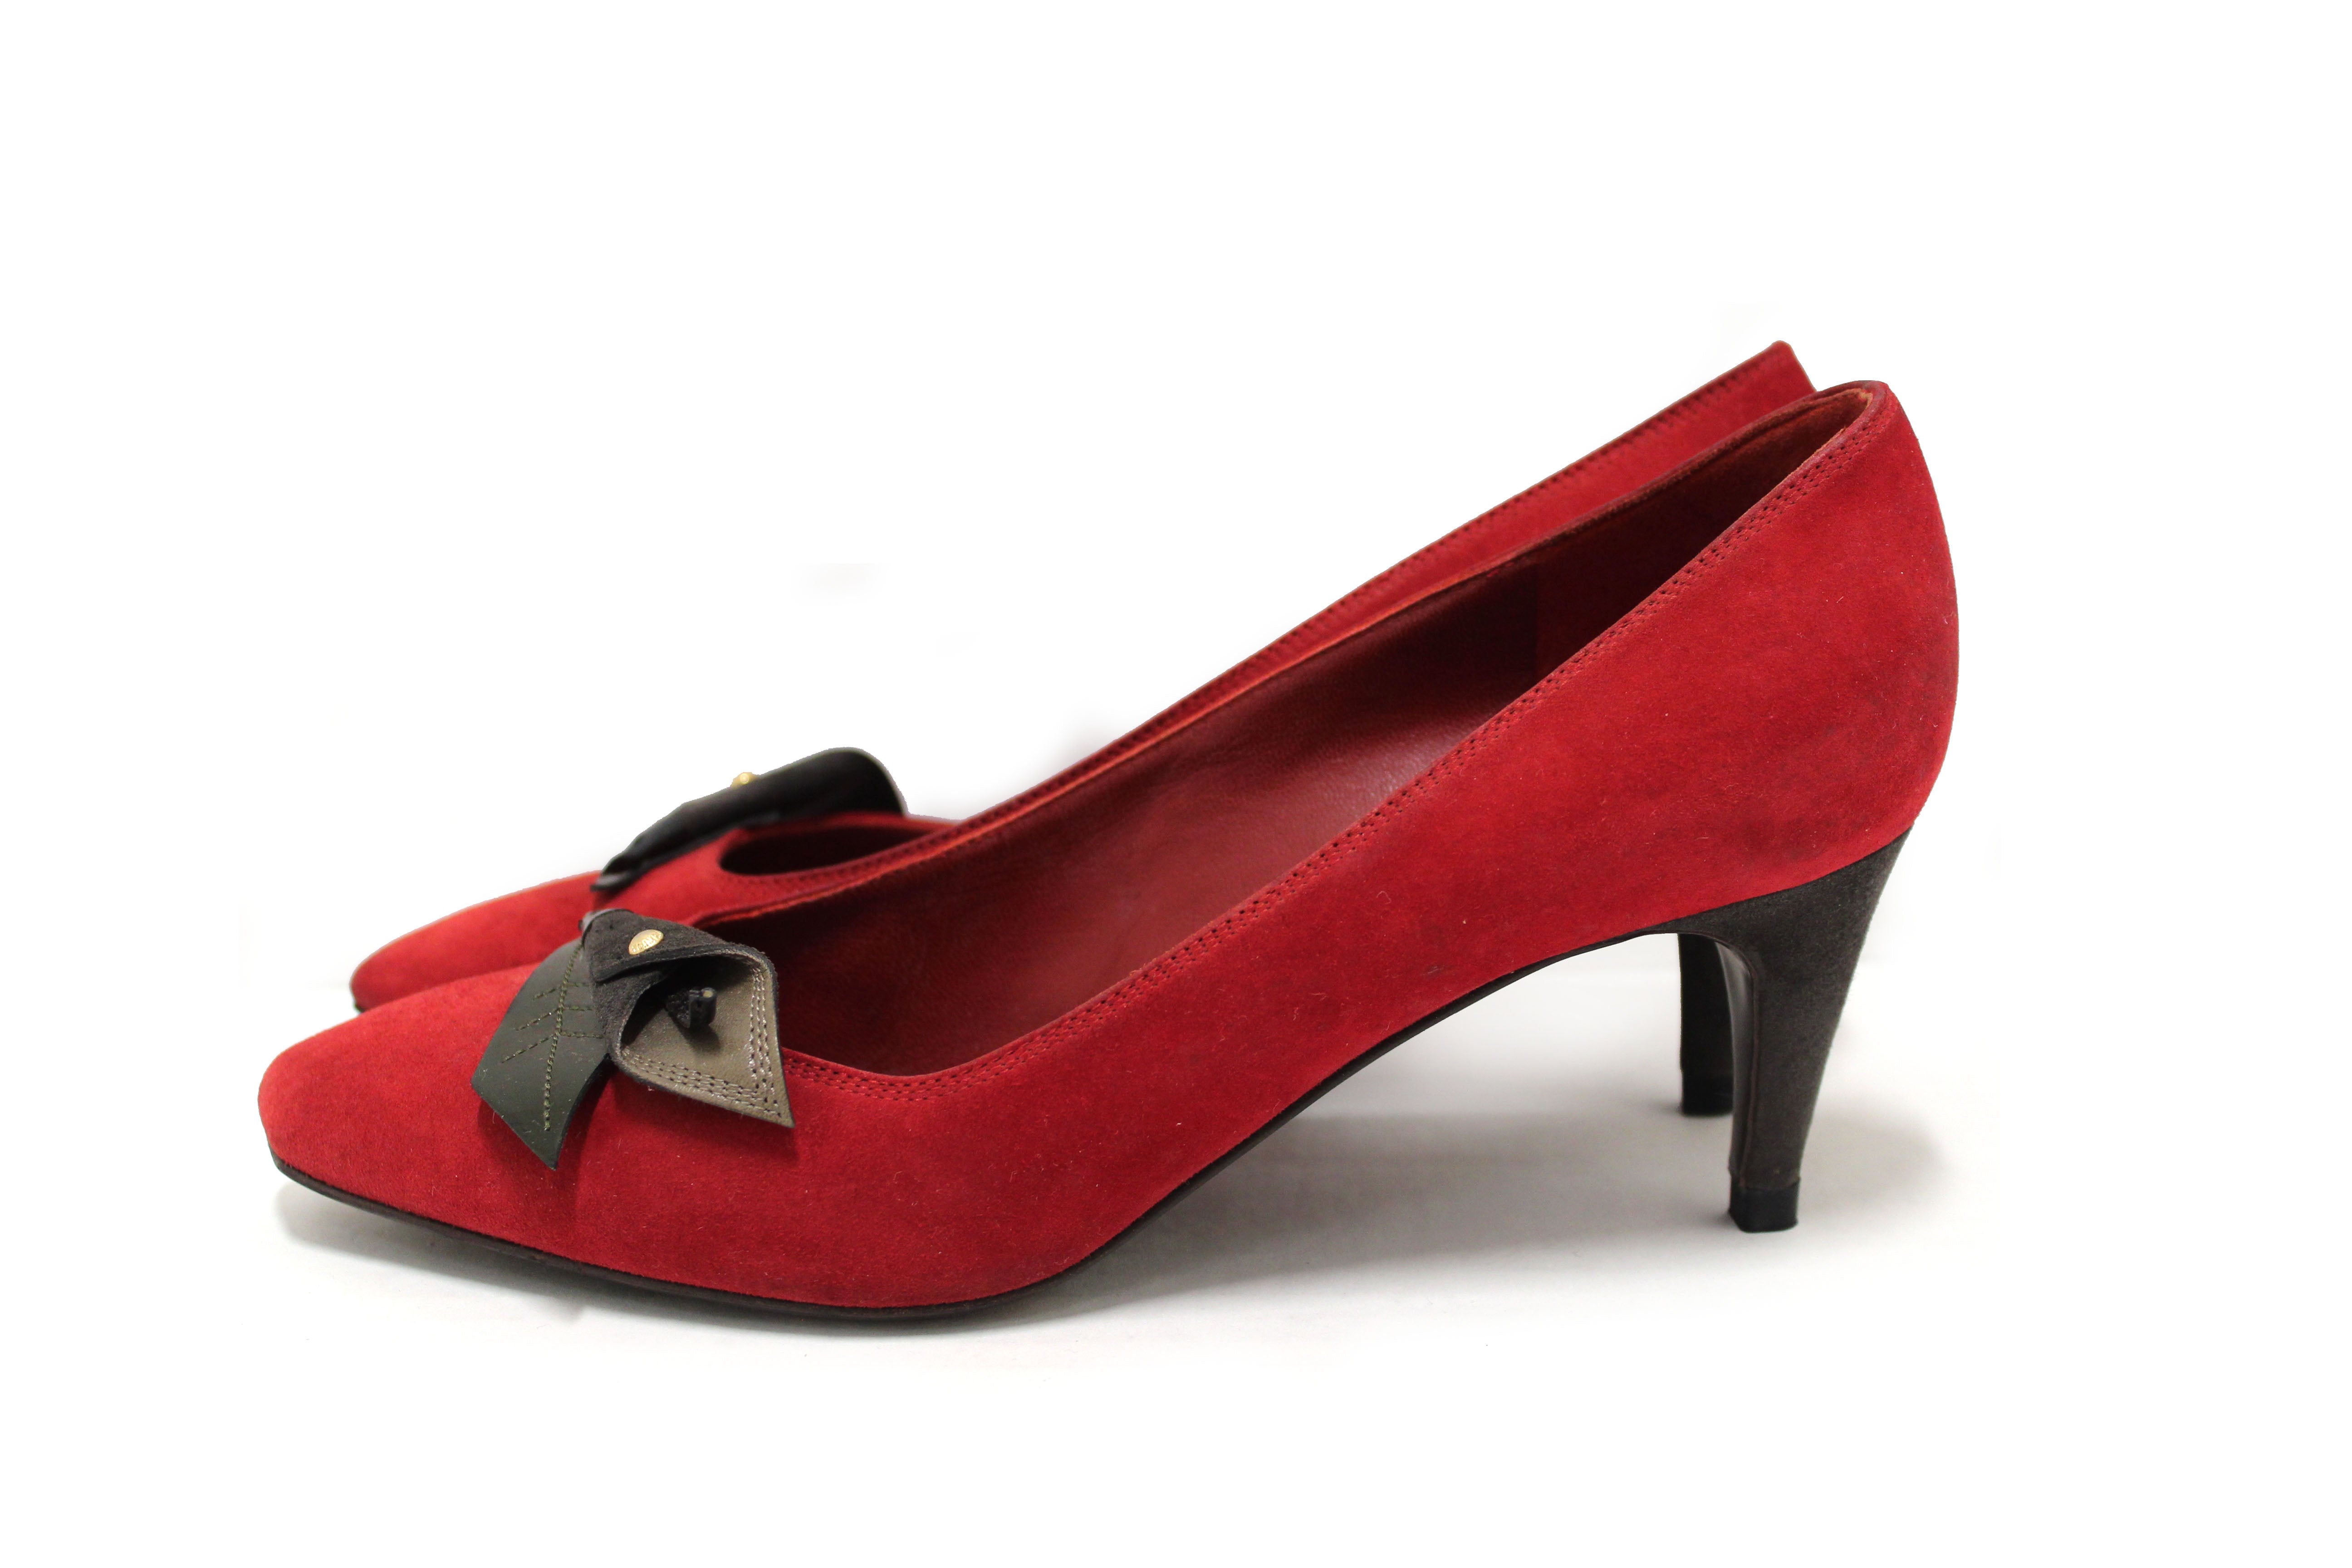 What is Red Bottom Heels Plus Size Office Shoes Lv's Elegant PU